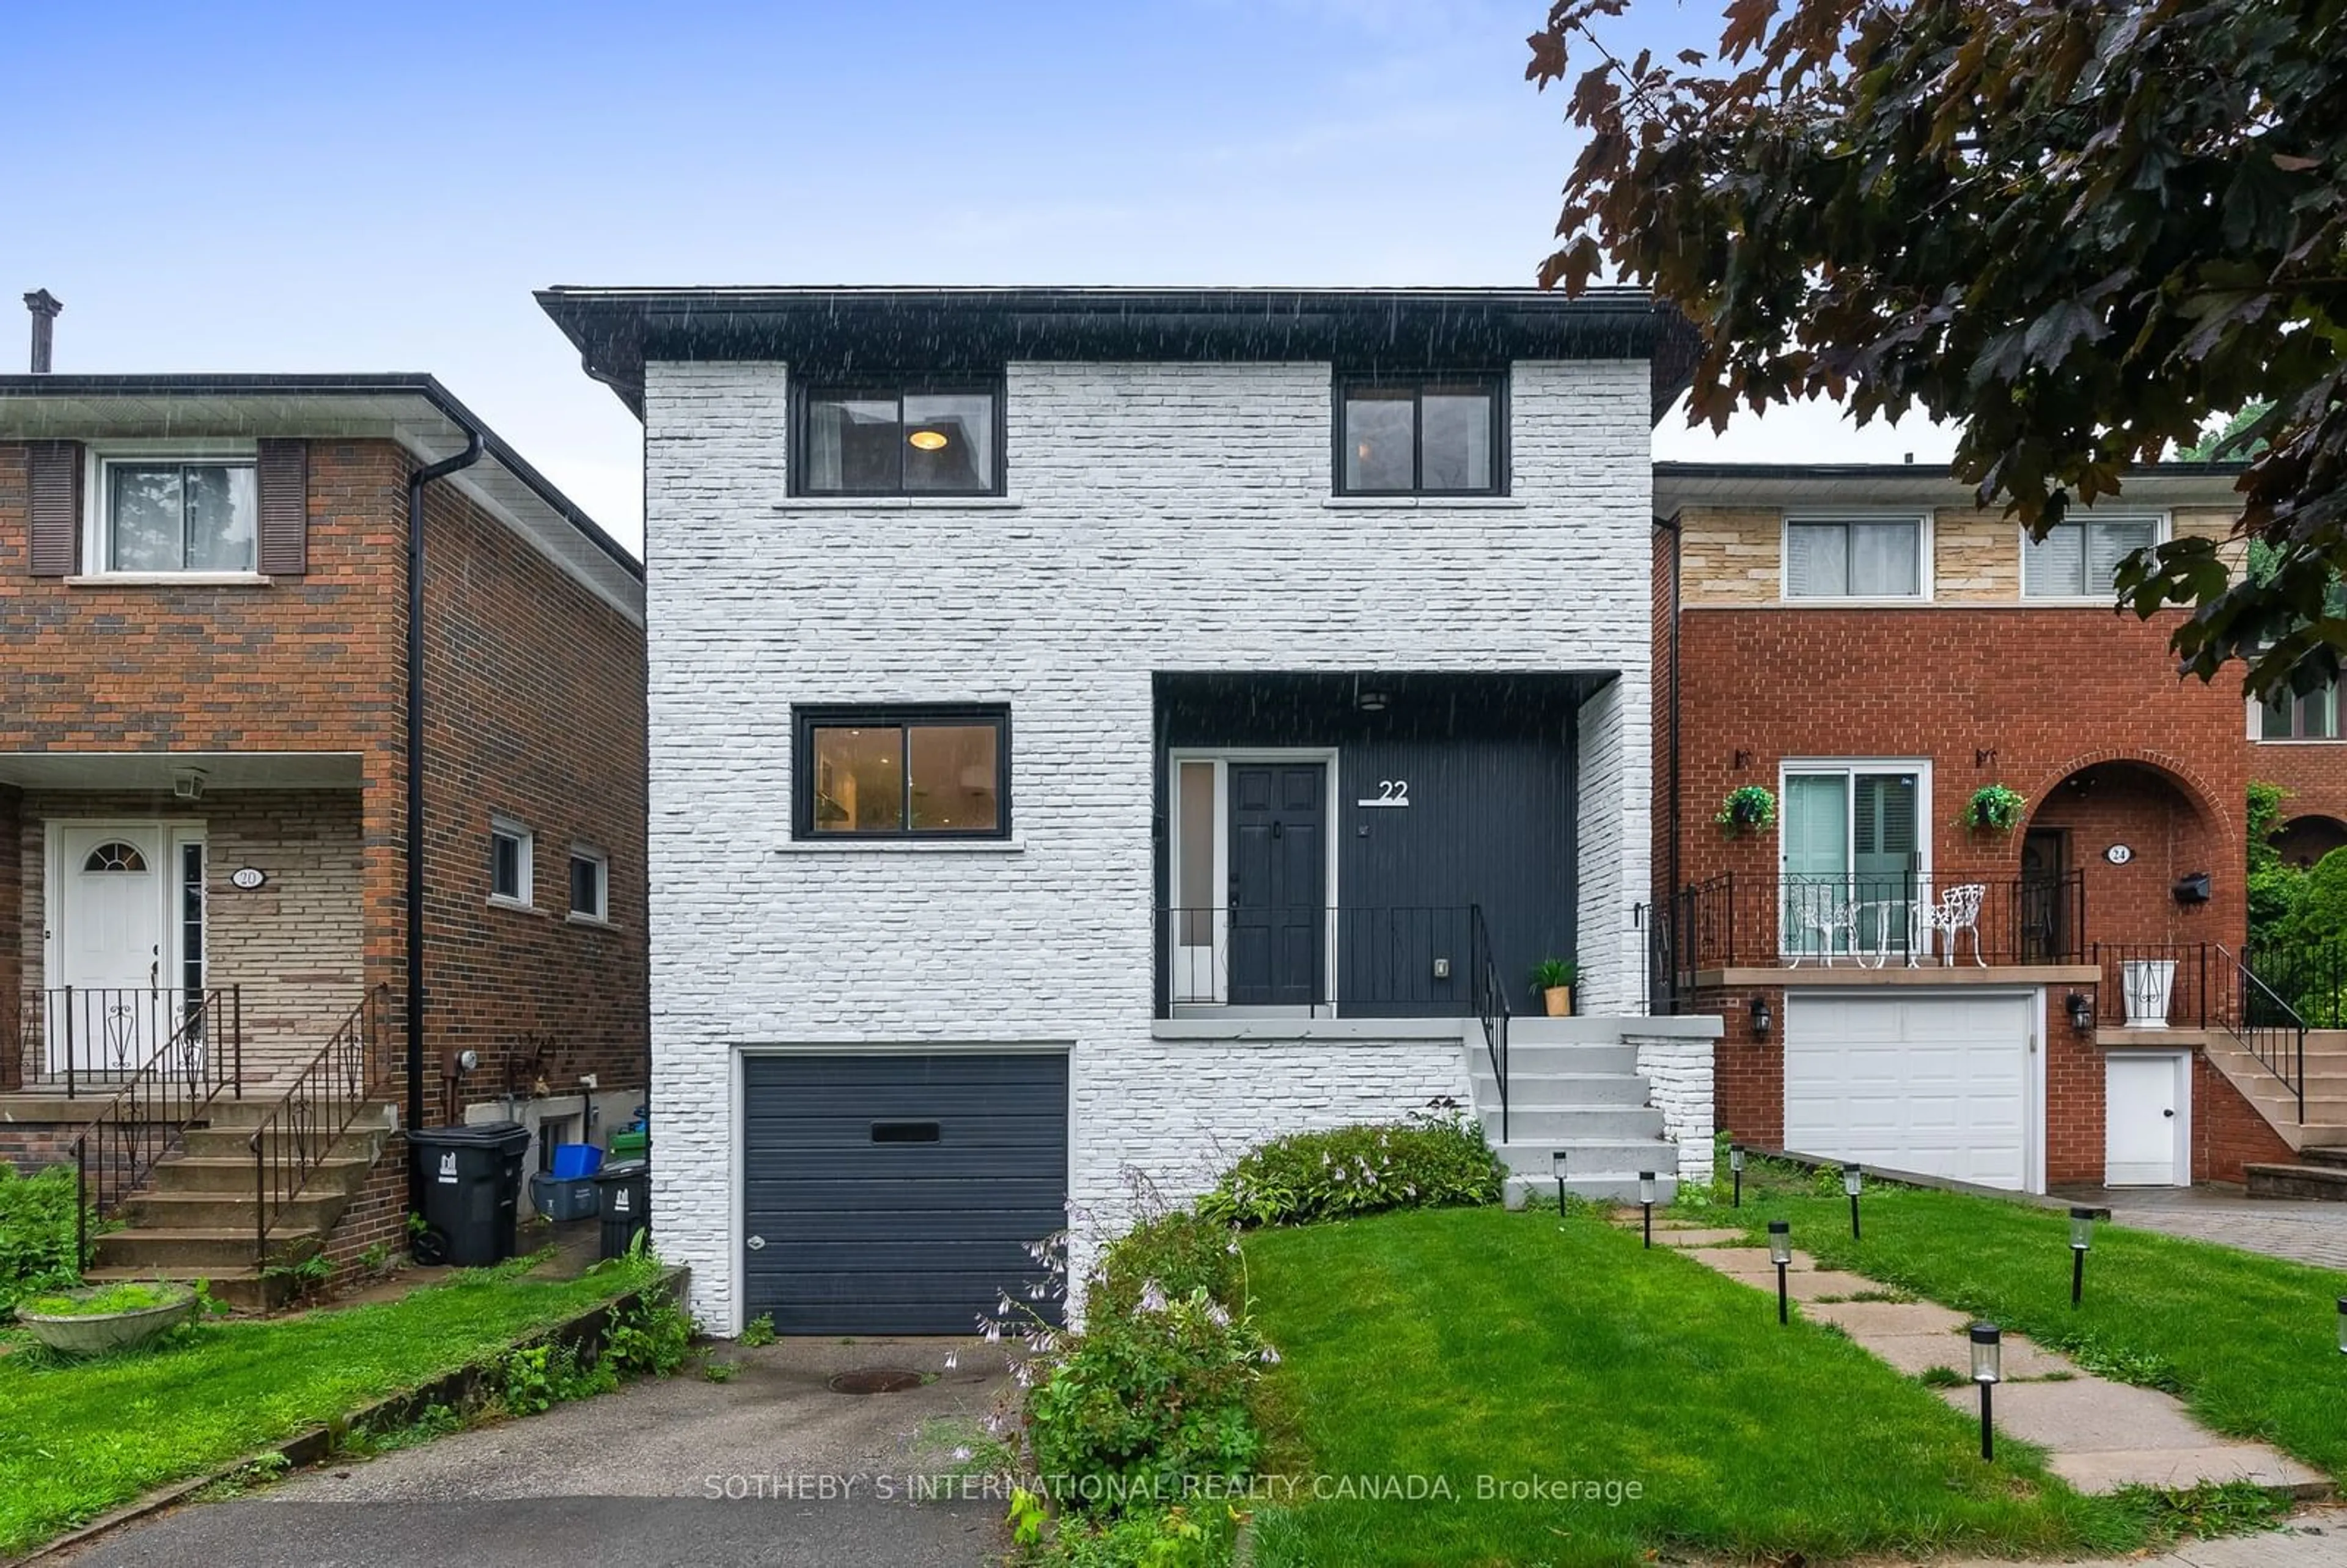 Home with brick exterior material for 22 Ormskirk Crt, Toronto Ontario M6S 1B1